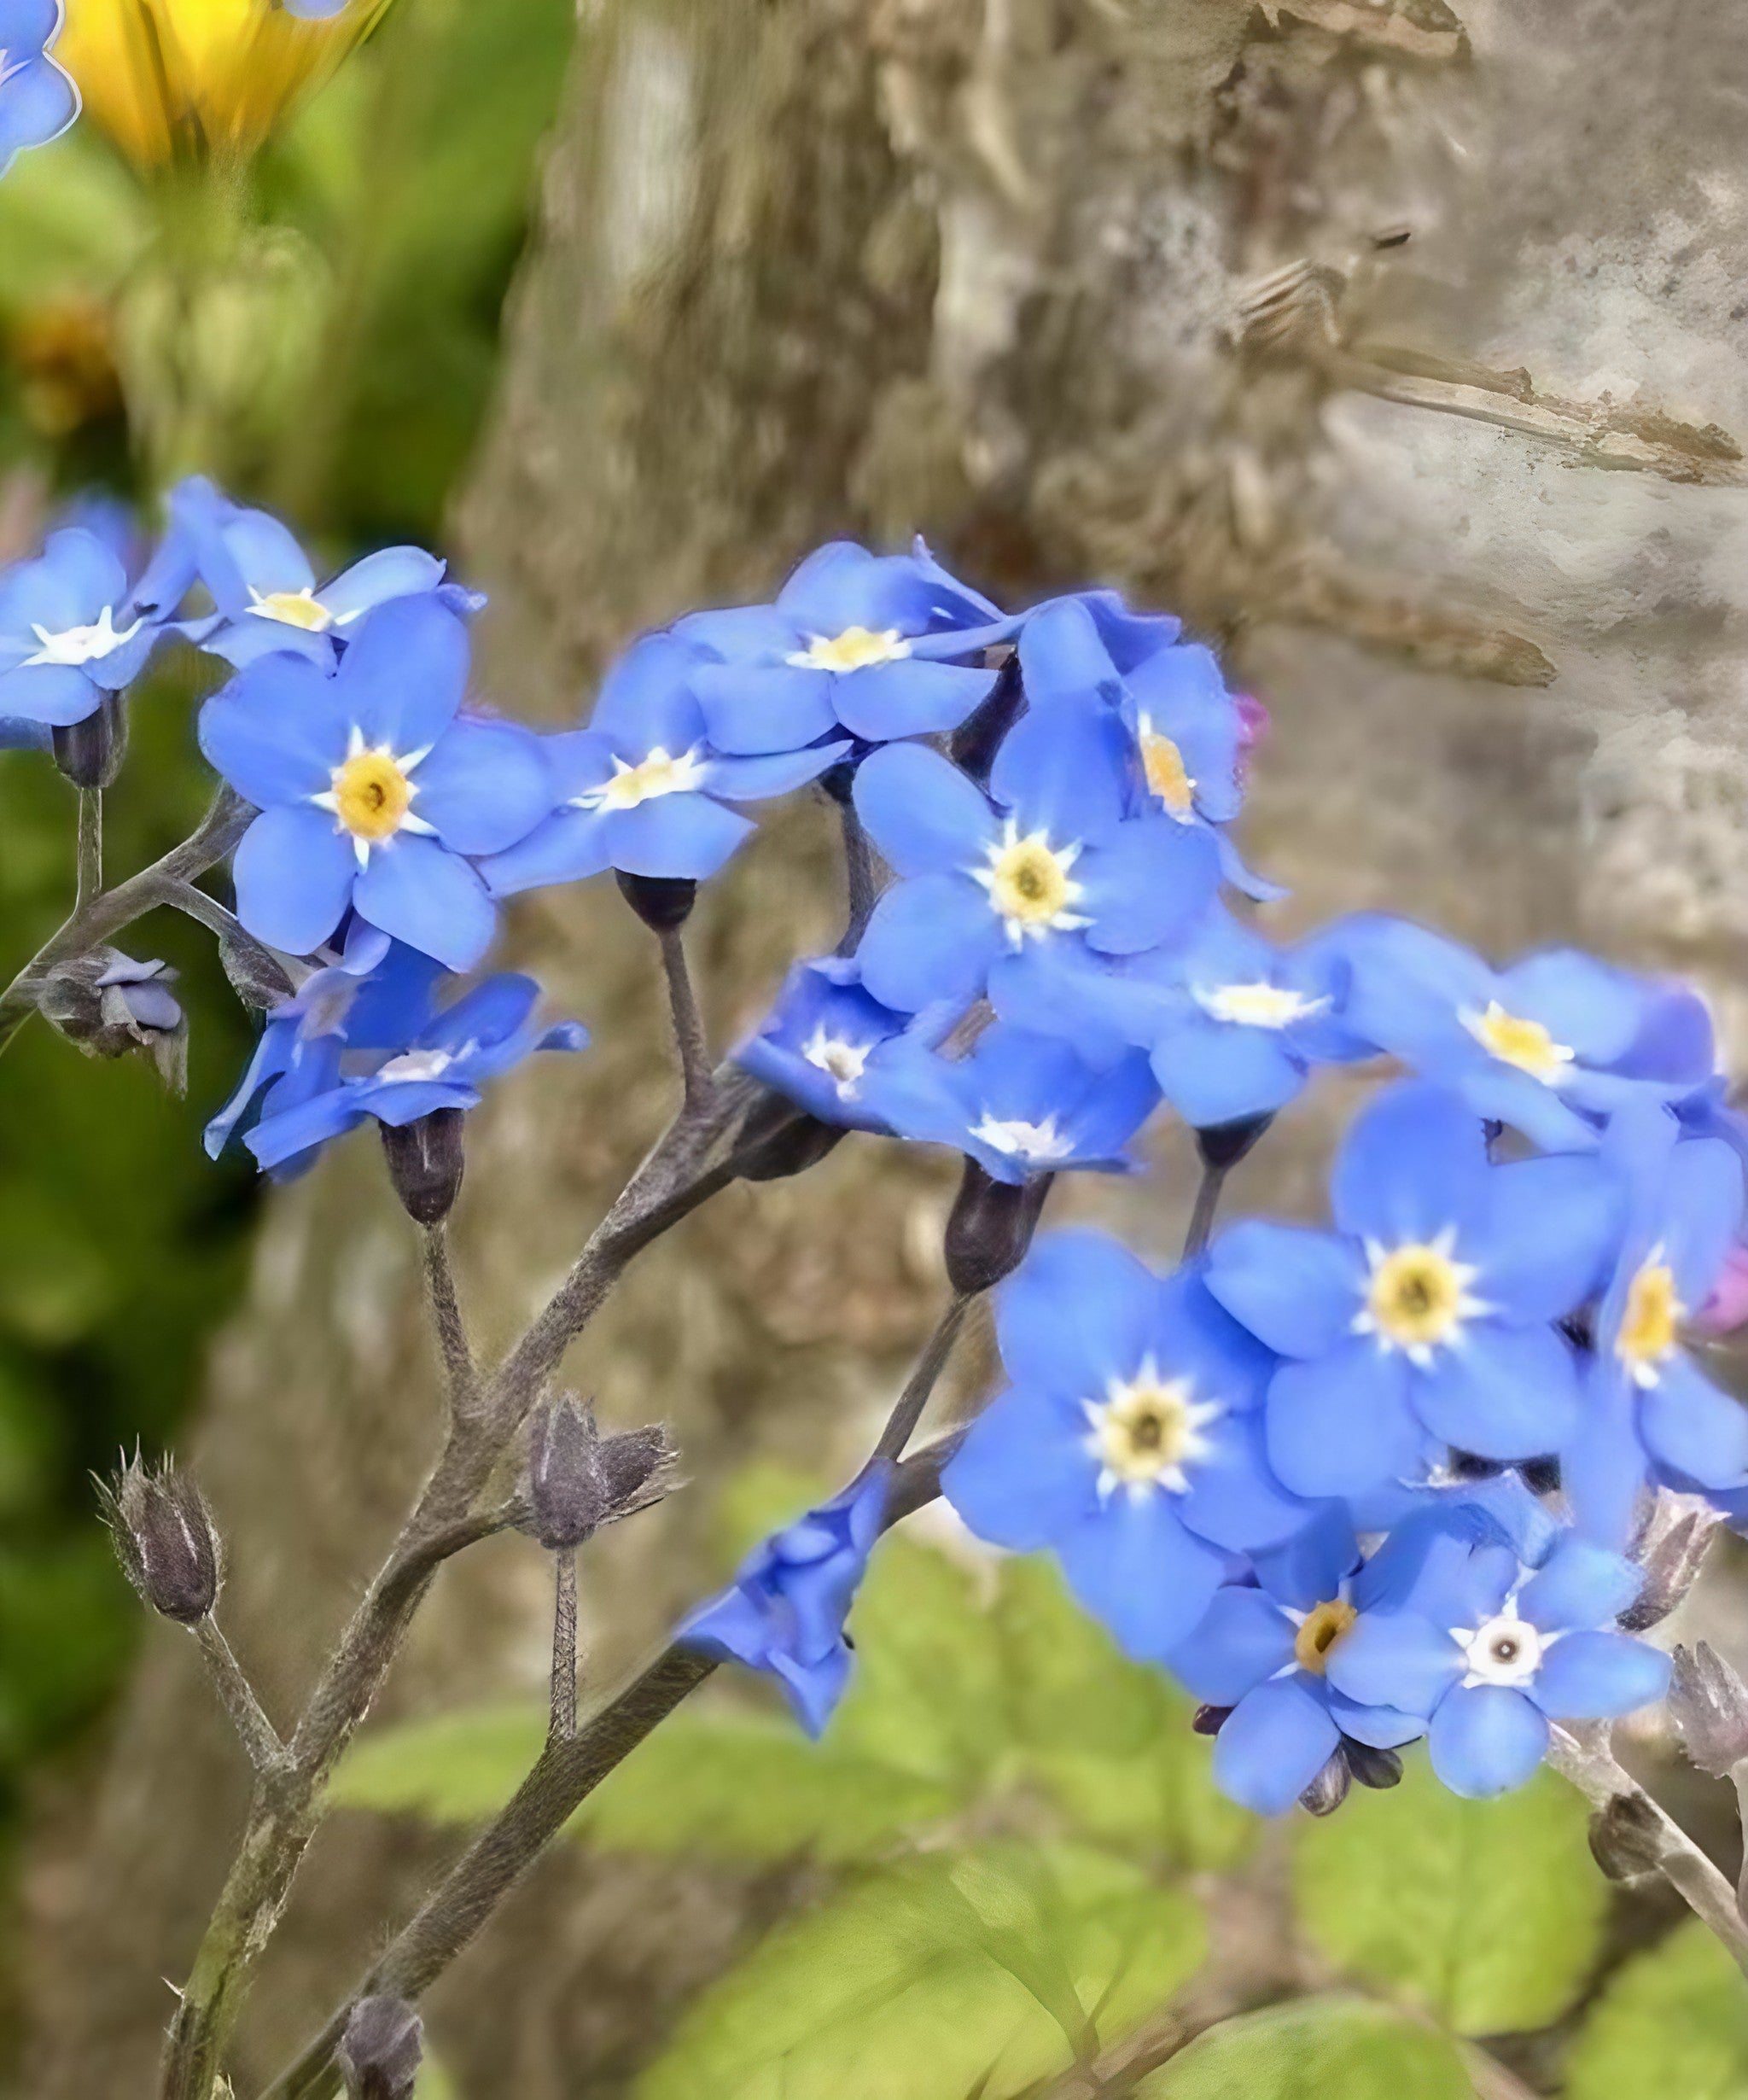 Clusters of Forget-me-not (Blue) flowers with delicate petals